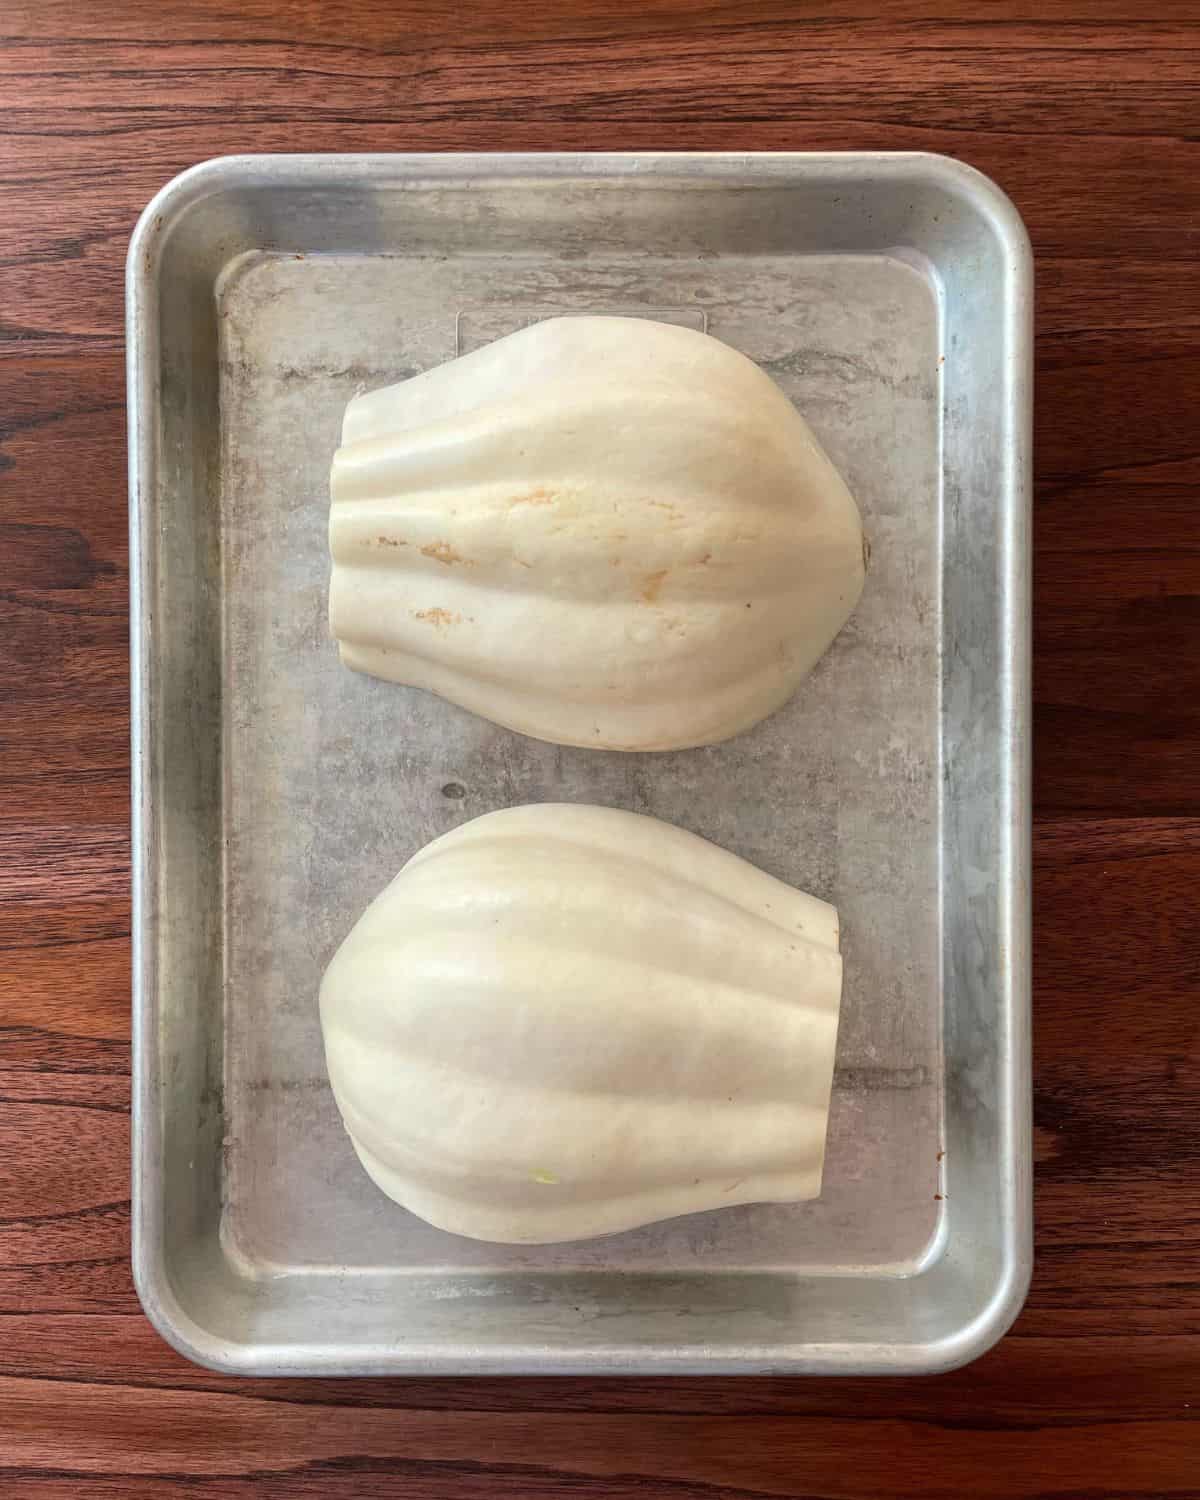 Uncooked white acorn squash cut open with the cut side down, on a baking sheet.